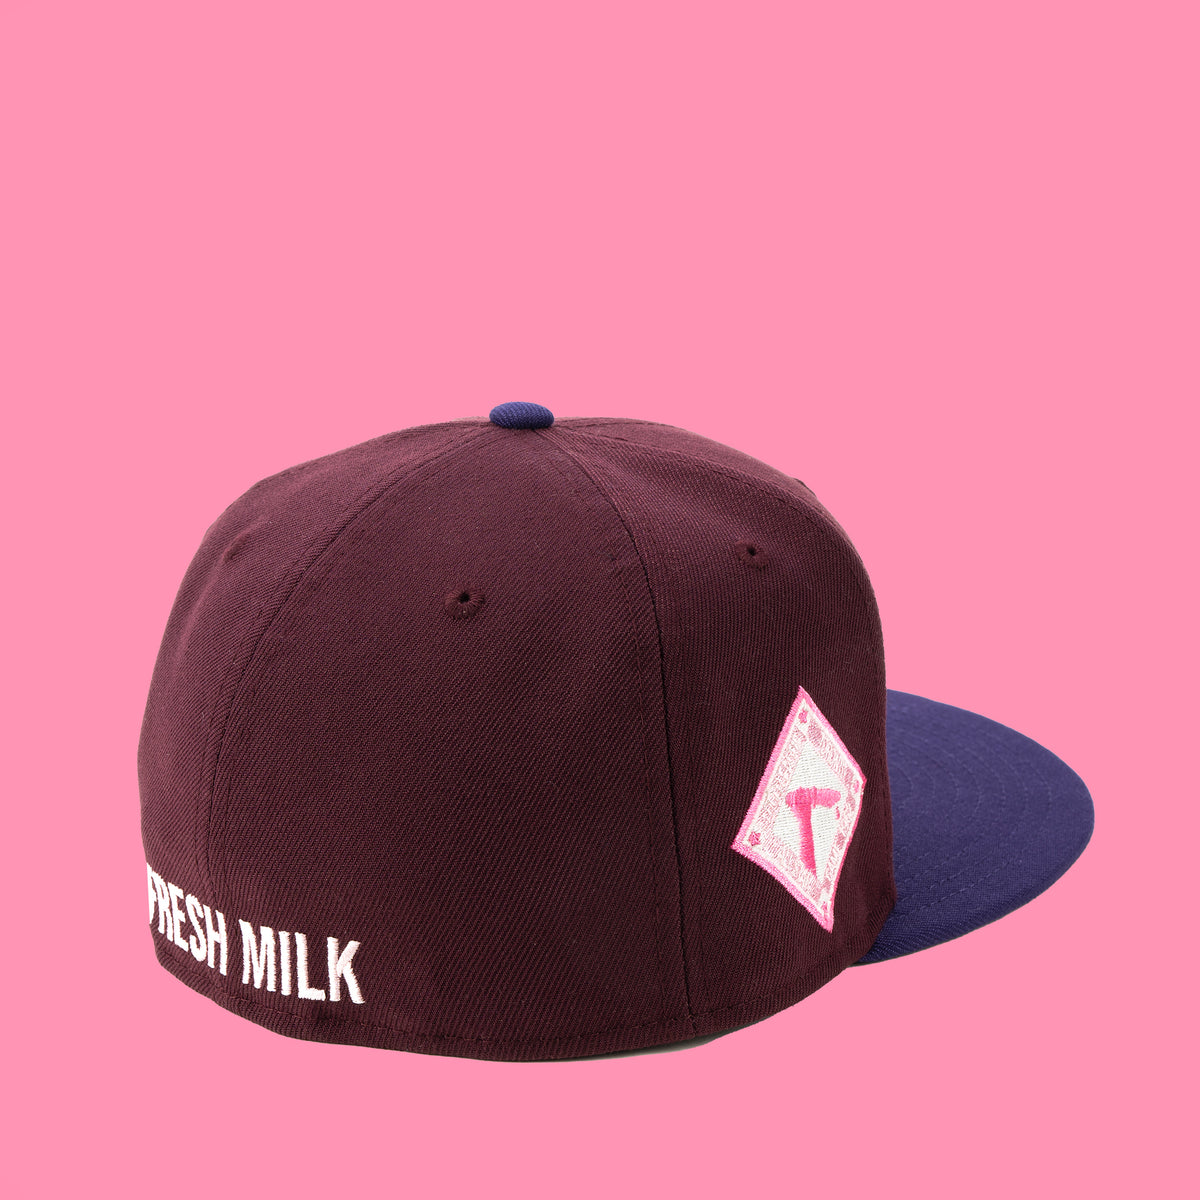 Cereal Killer 2 Beige Pink Brown 59Fifty Fitted by Milk x New Era